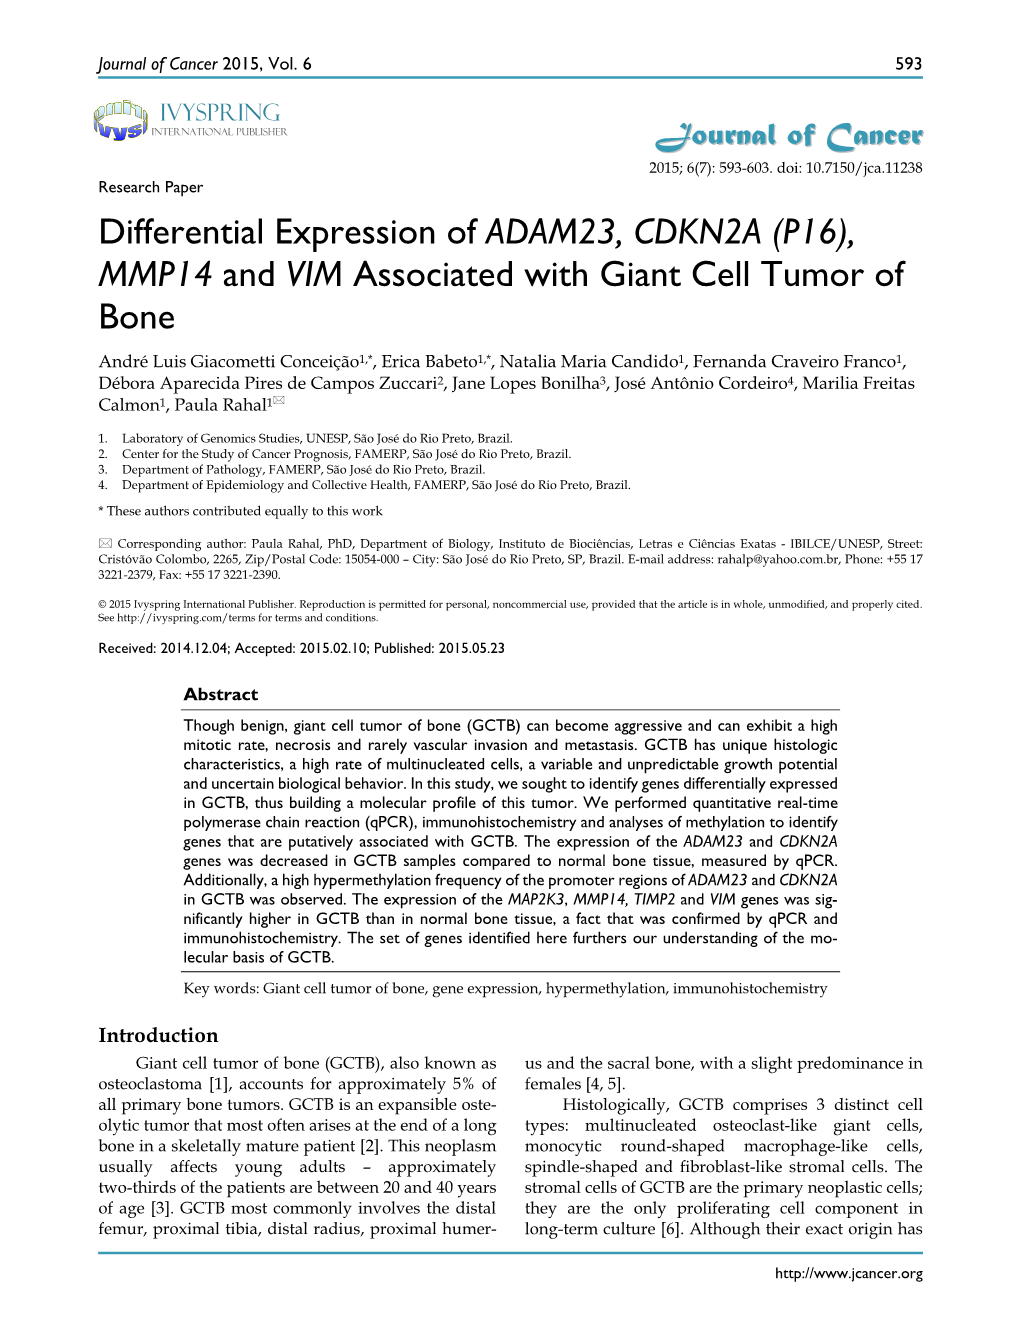 Differential Expression of ADAM23, CDKN2A (P16), MMP14 and VIM